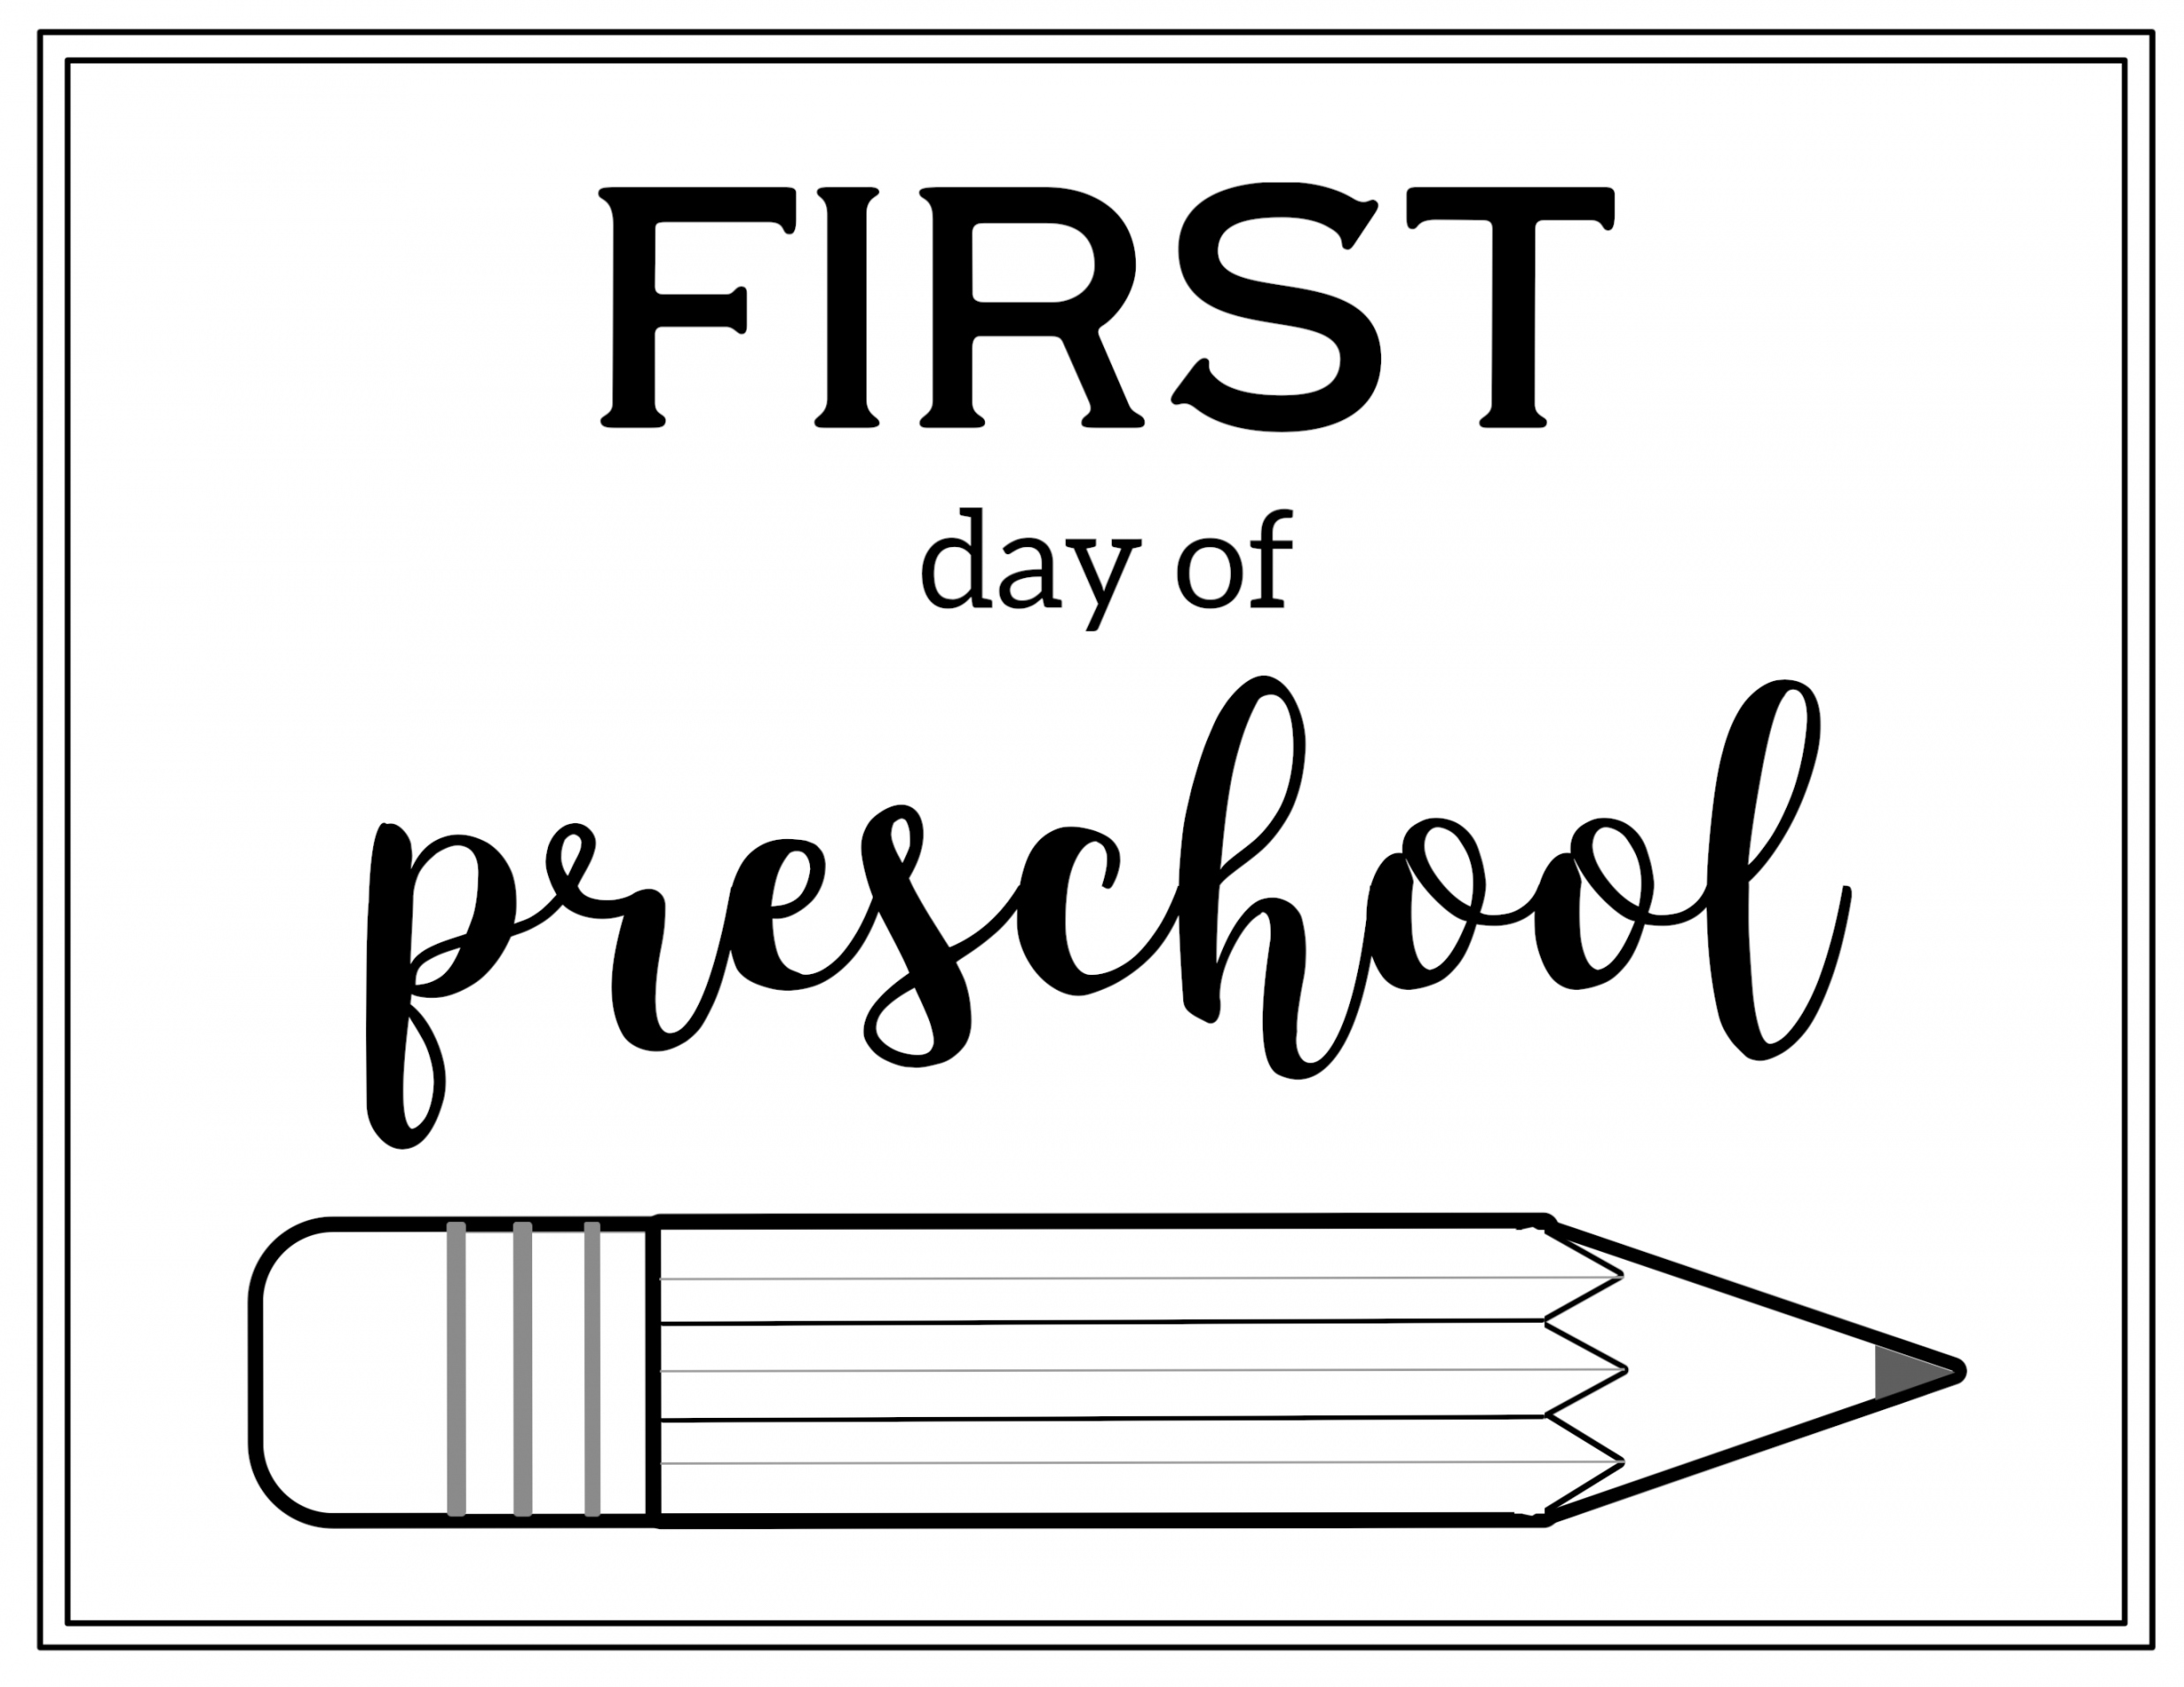 Free Printable First Day of School Sign Pencil - Paper Trail Design - FREE Printables - Free Printable First Day Of Preschool Sign